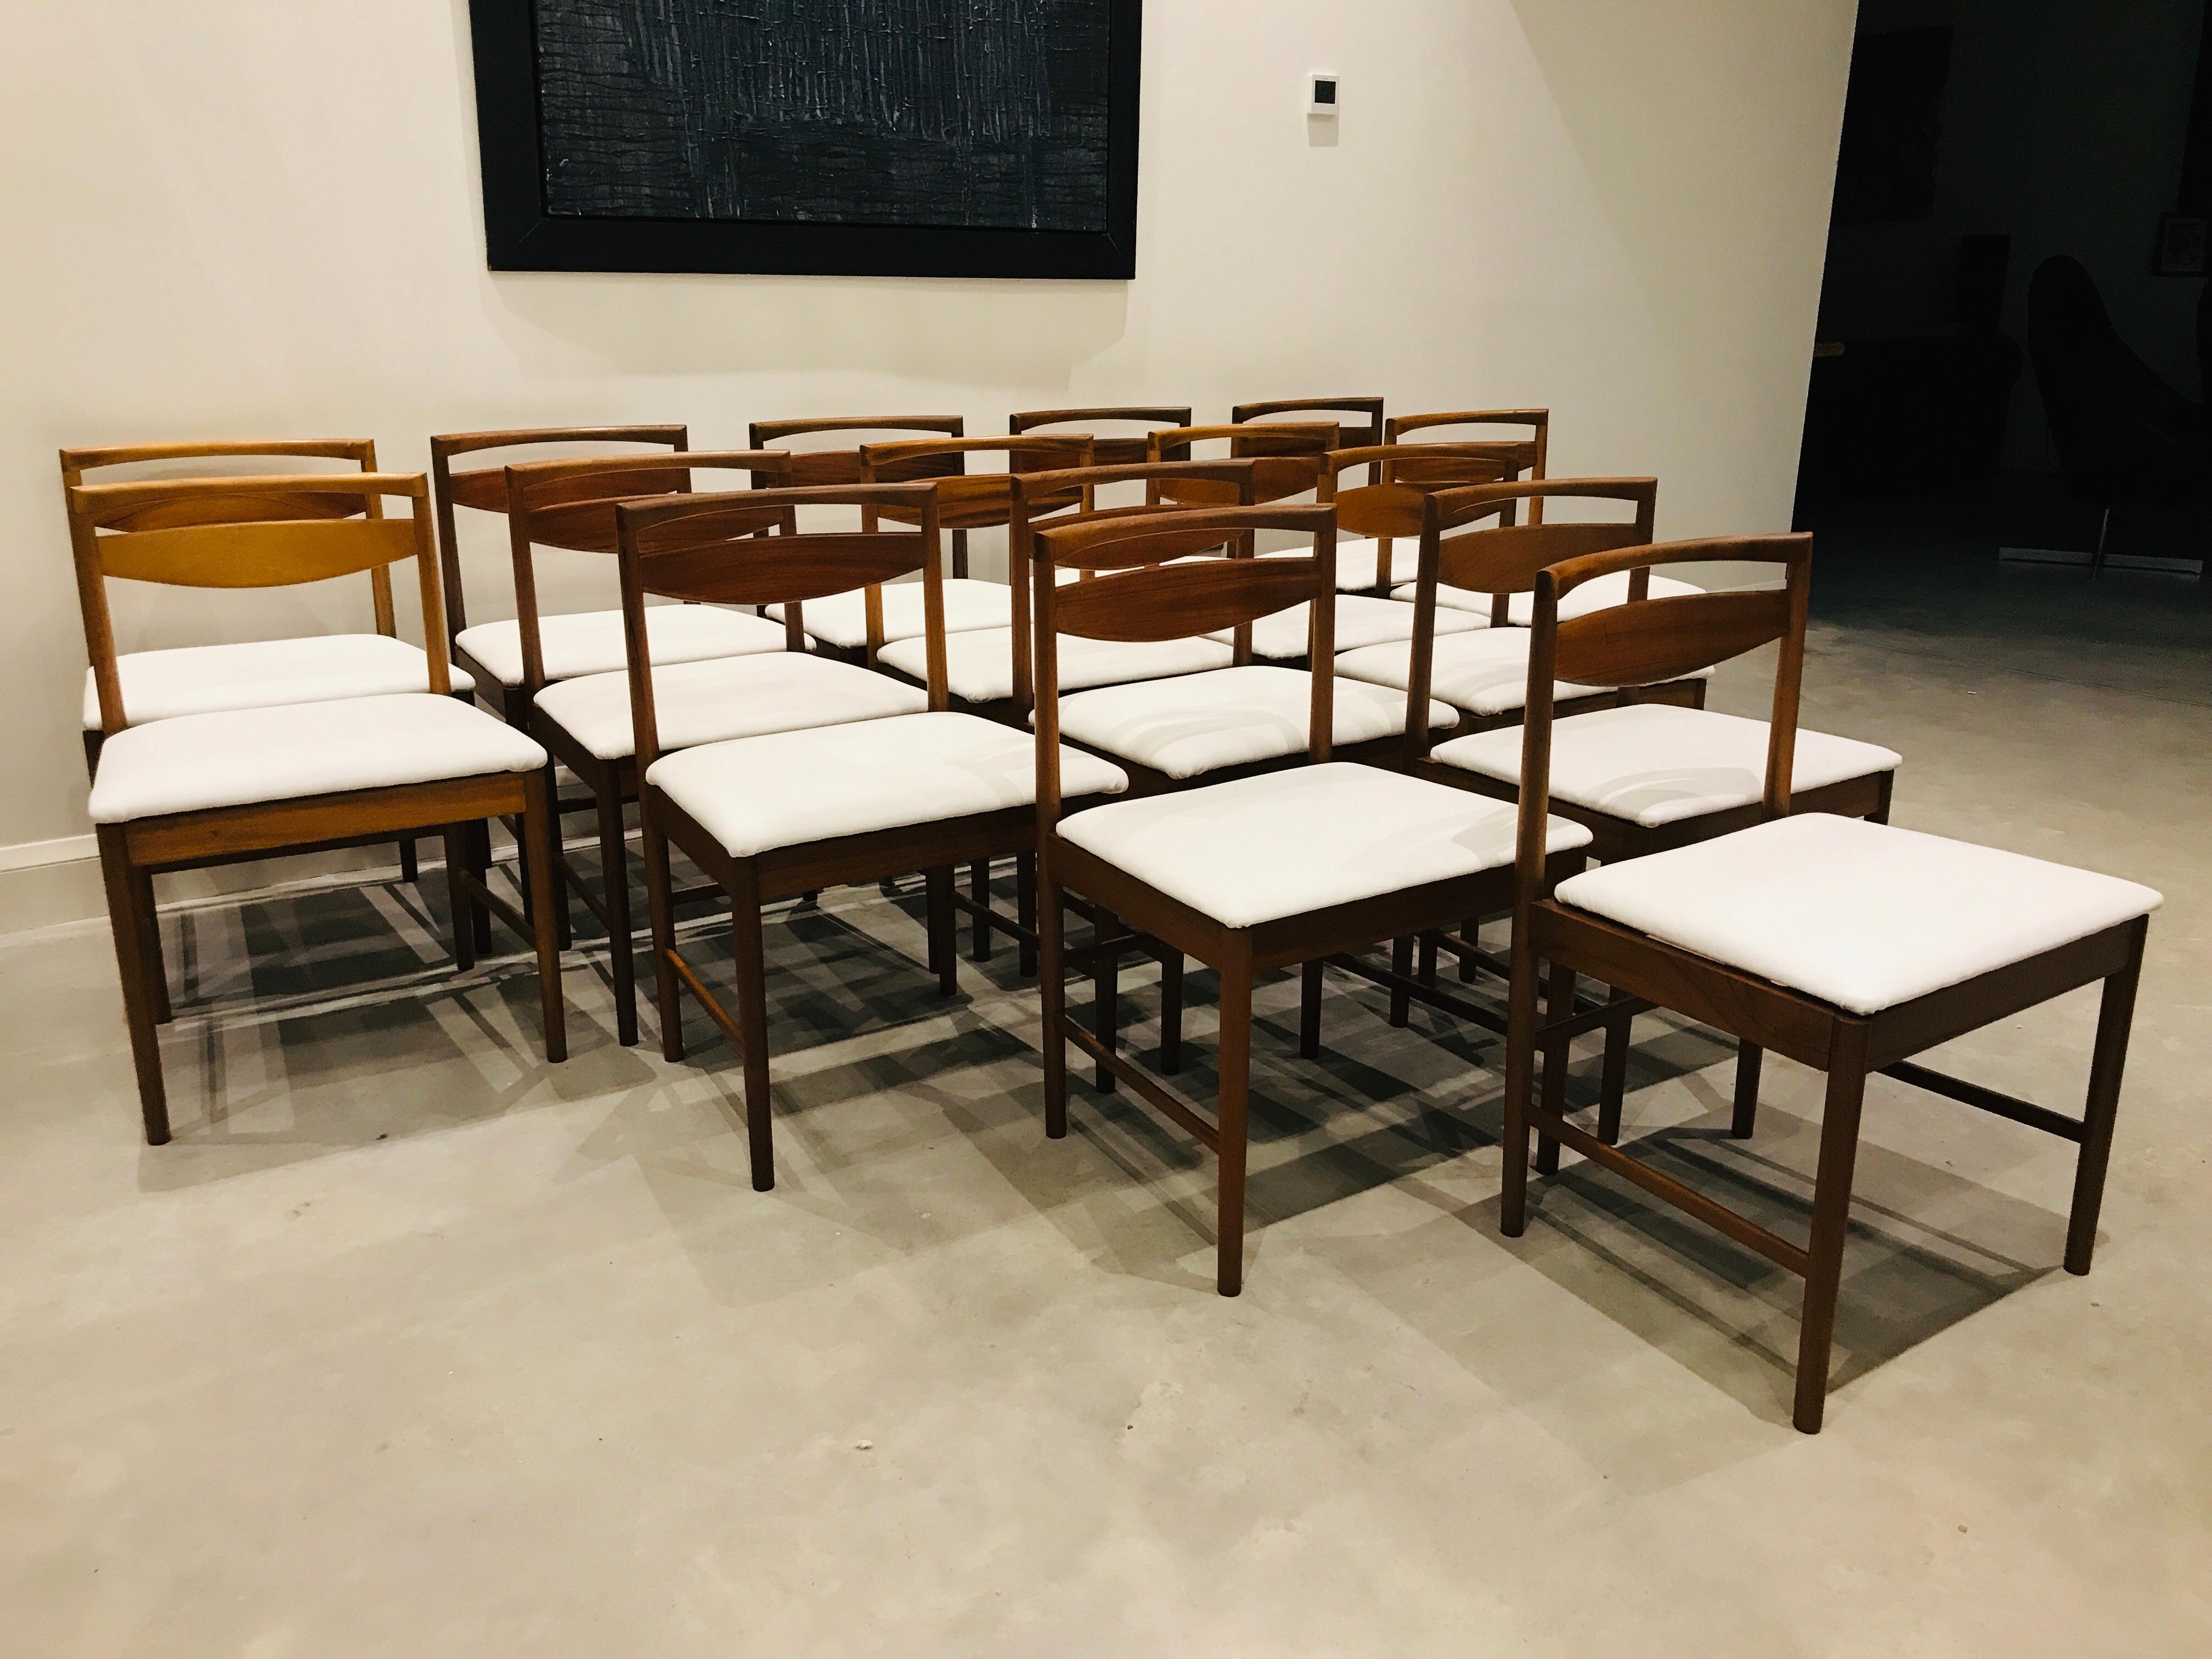 McIntosh teak 

Stunning set of Chairs, McIntosh made and designed chairs, one of the best period furniture makers from the 1960s!! the chairs are upholstered in a lovely White Leather. We currently have 8 chairs available. price for delivery is for